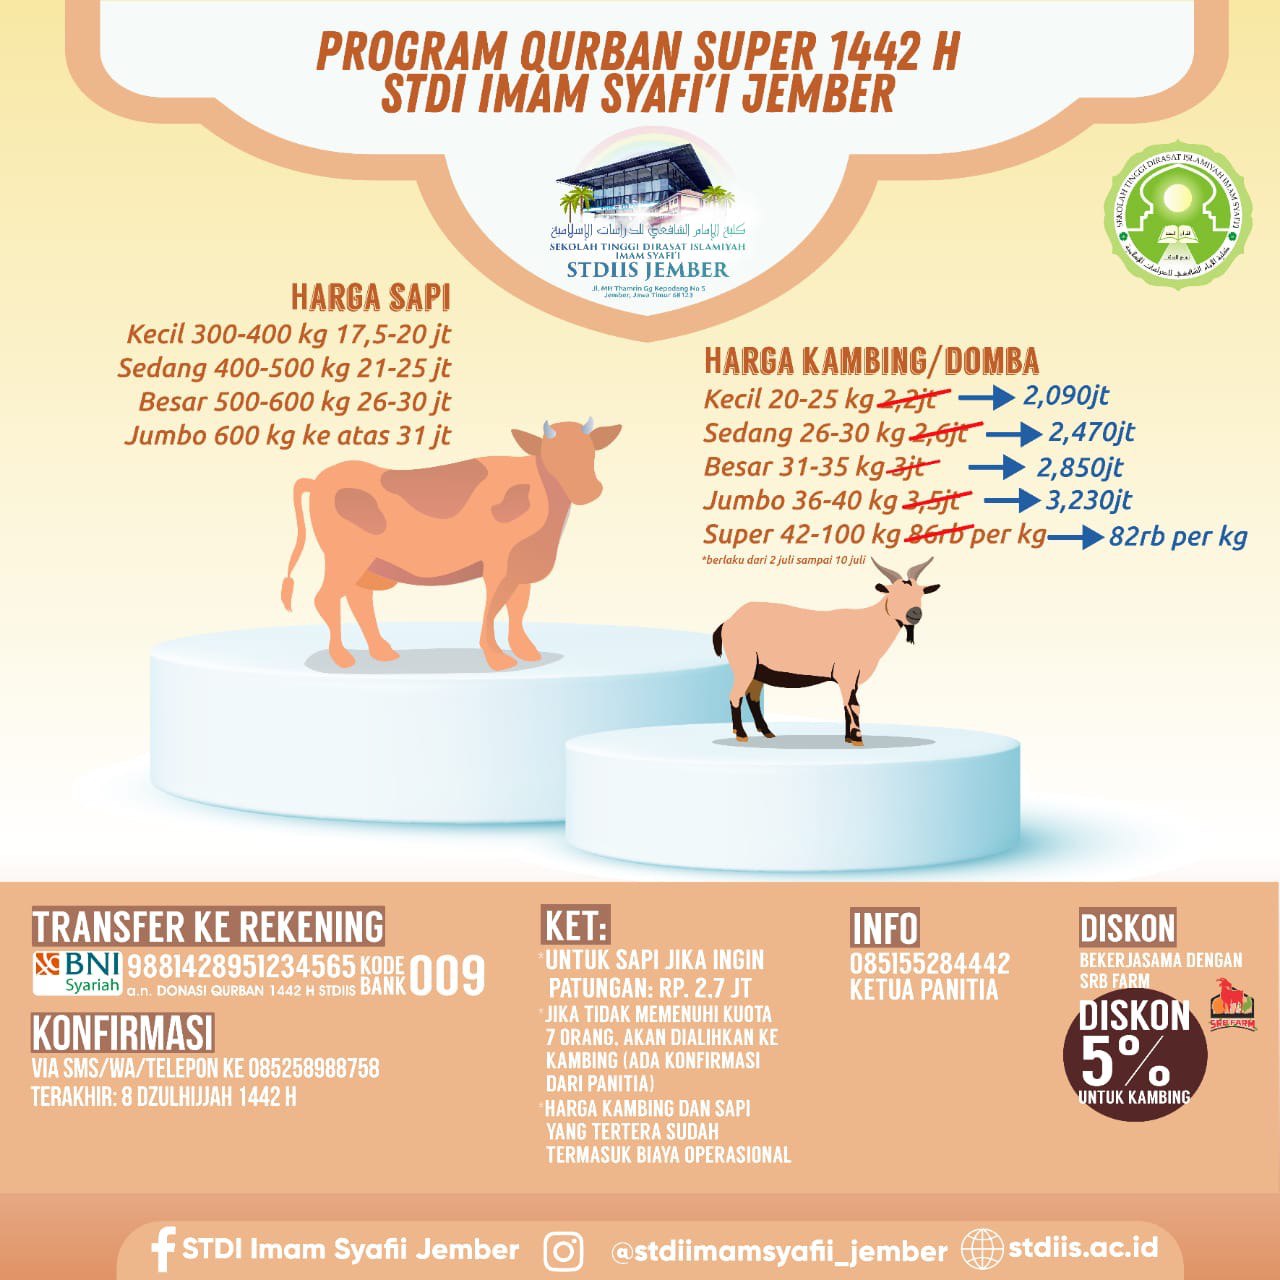 You are currently viewing Update Harga Program Qurban Super 2-10 Juli 2021